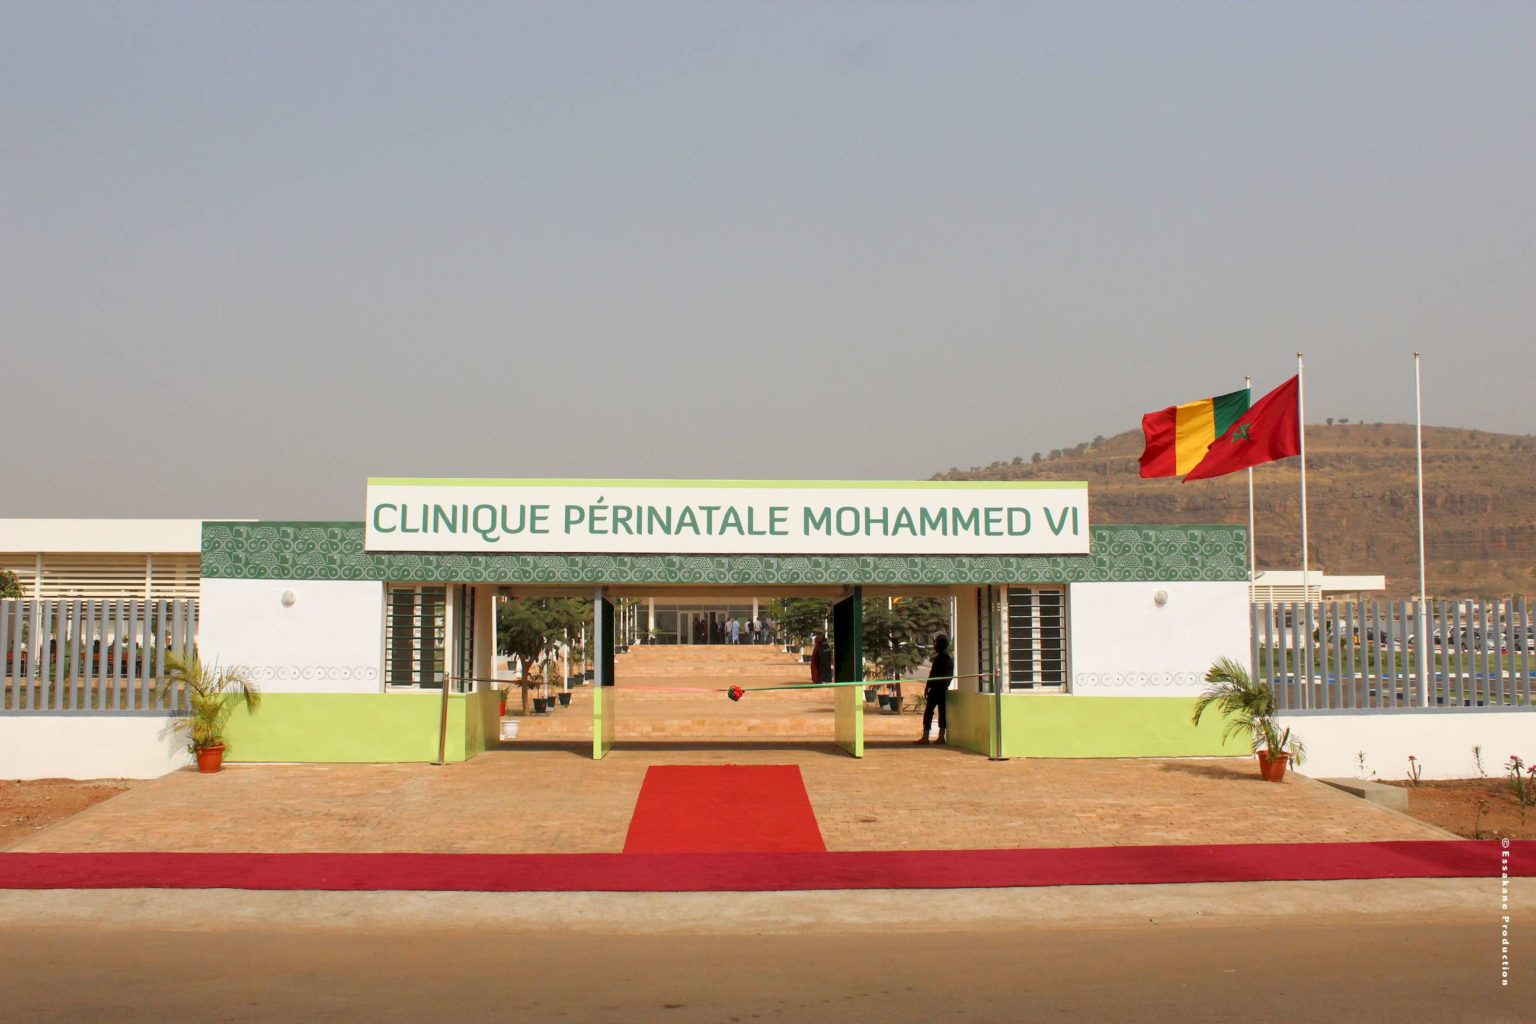 Covid-19: King Mohammed VI puts Sébéninkoro Polyclinic at the disposal of the Government of Mali